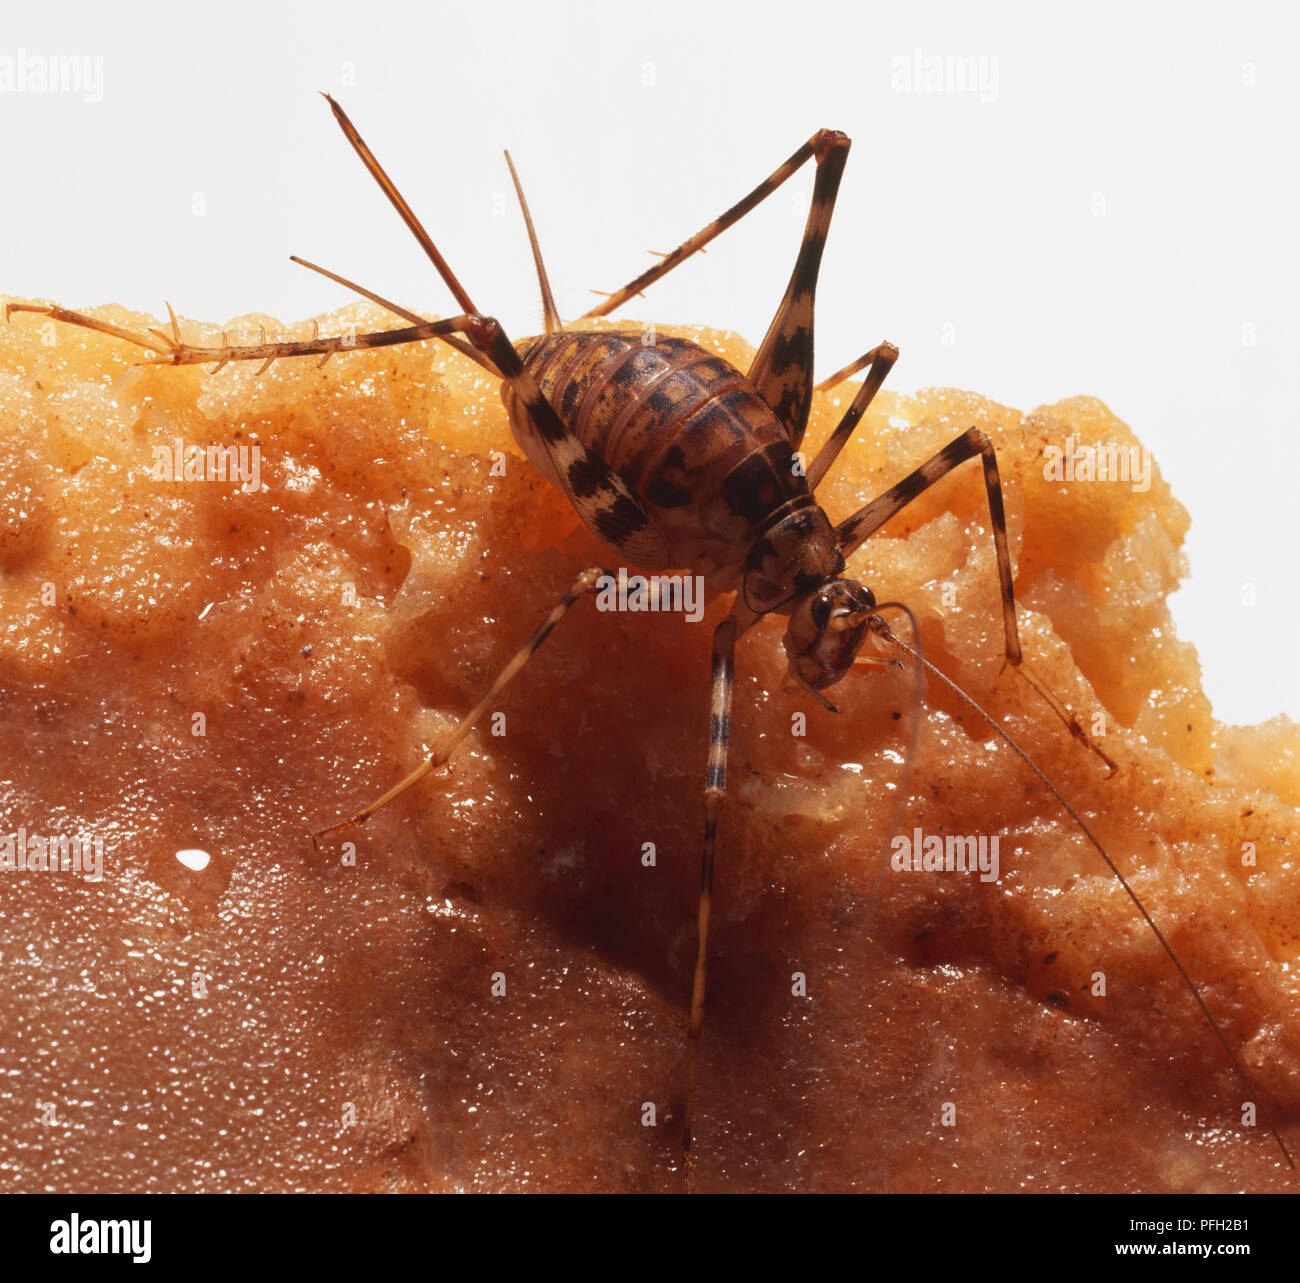 Cave Cricket, also known as Camel Cricket thanks to humped back, back legs covered in sharp spikes and spines, long-legged scavenger, antennae and feeler-like cerci, small compound eyes, clinging on to rock using its hooked feet. Stock Photo